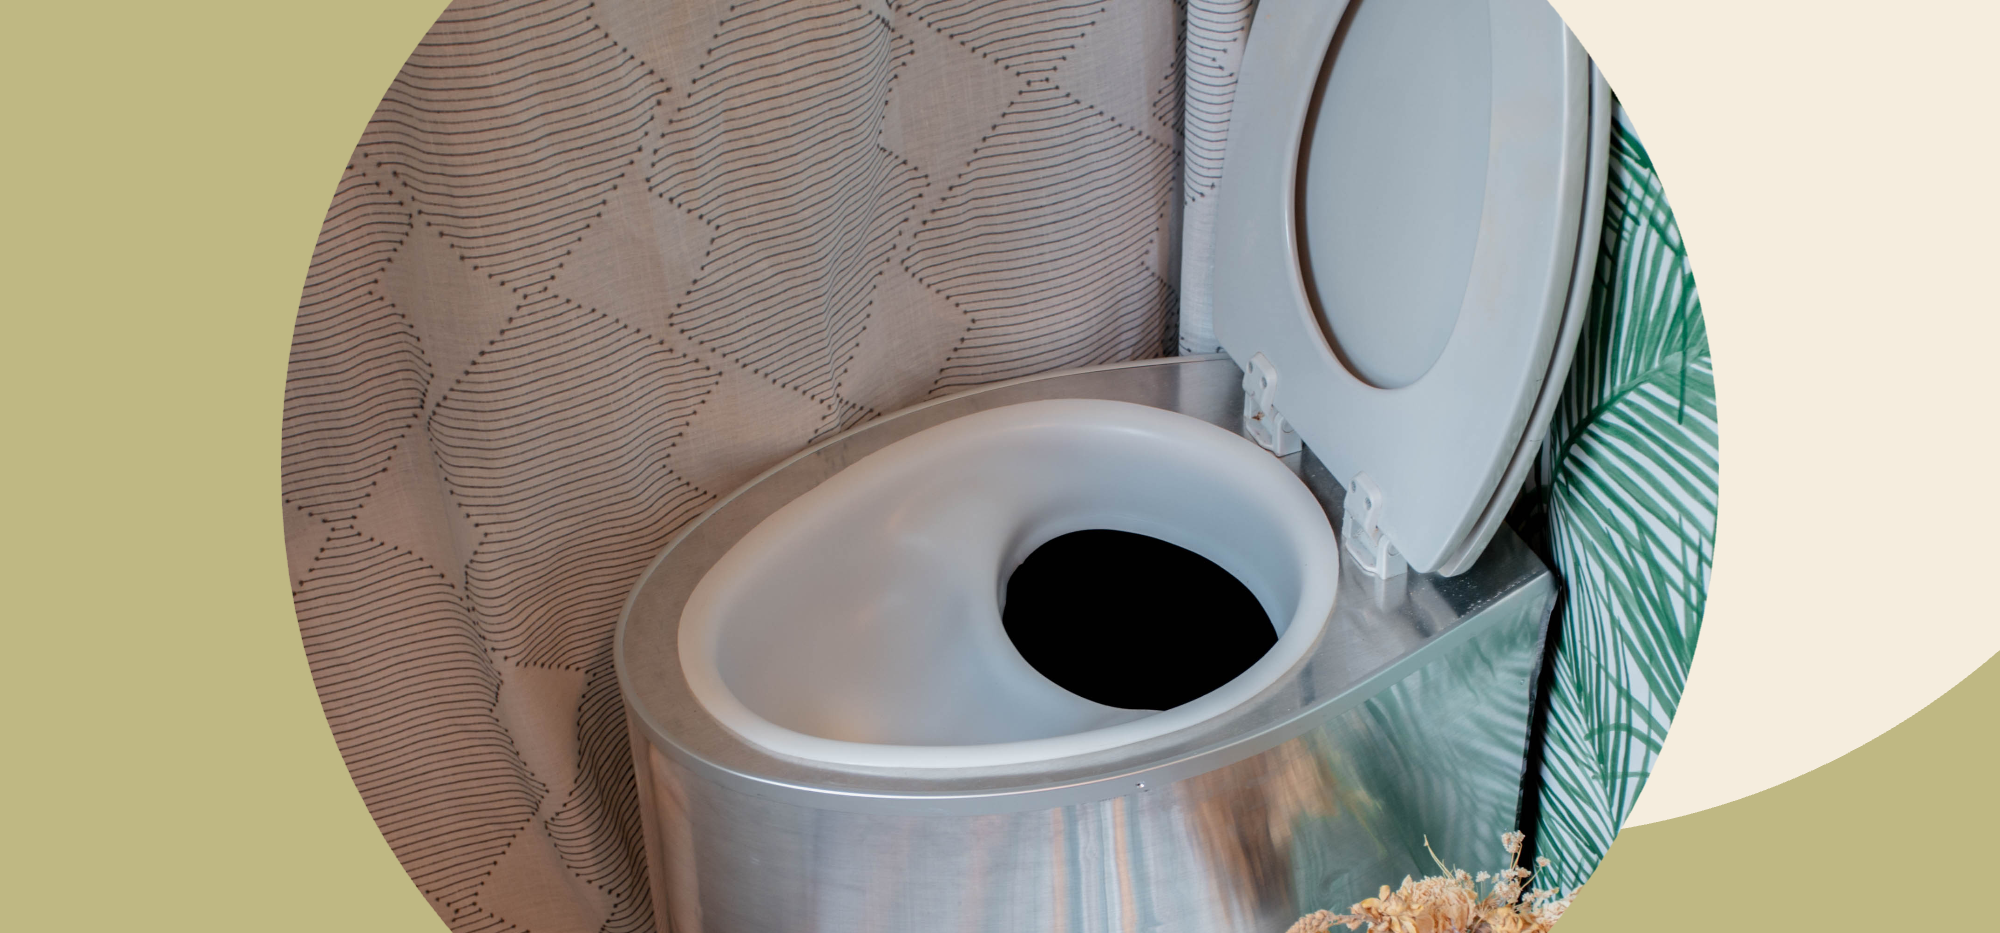 Troubleshooting a Smelly Composting Toilet